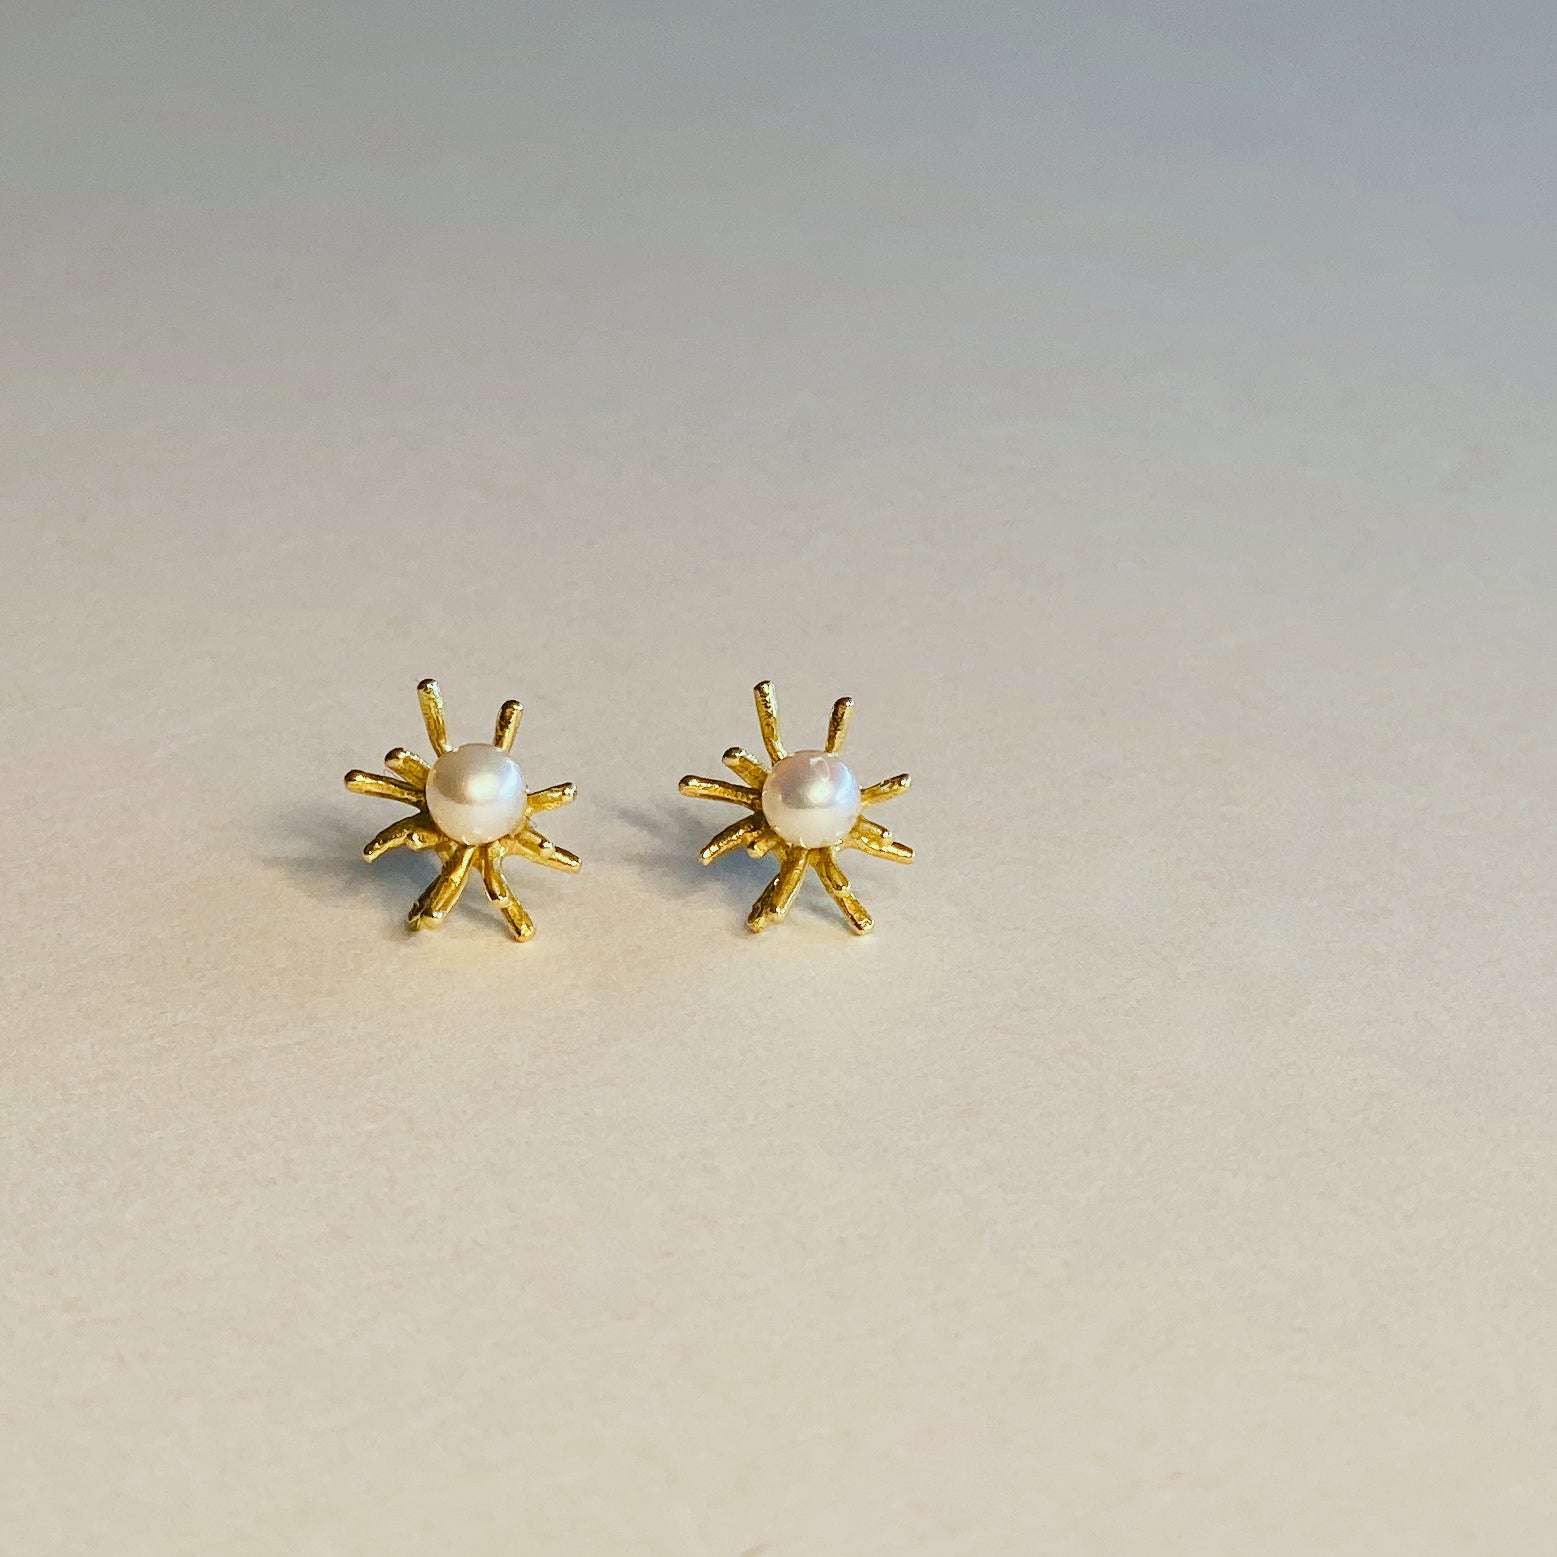 Sea Urchin earrings in solid 18 kt gold with natural pearls.